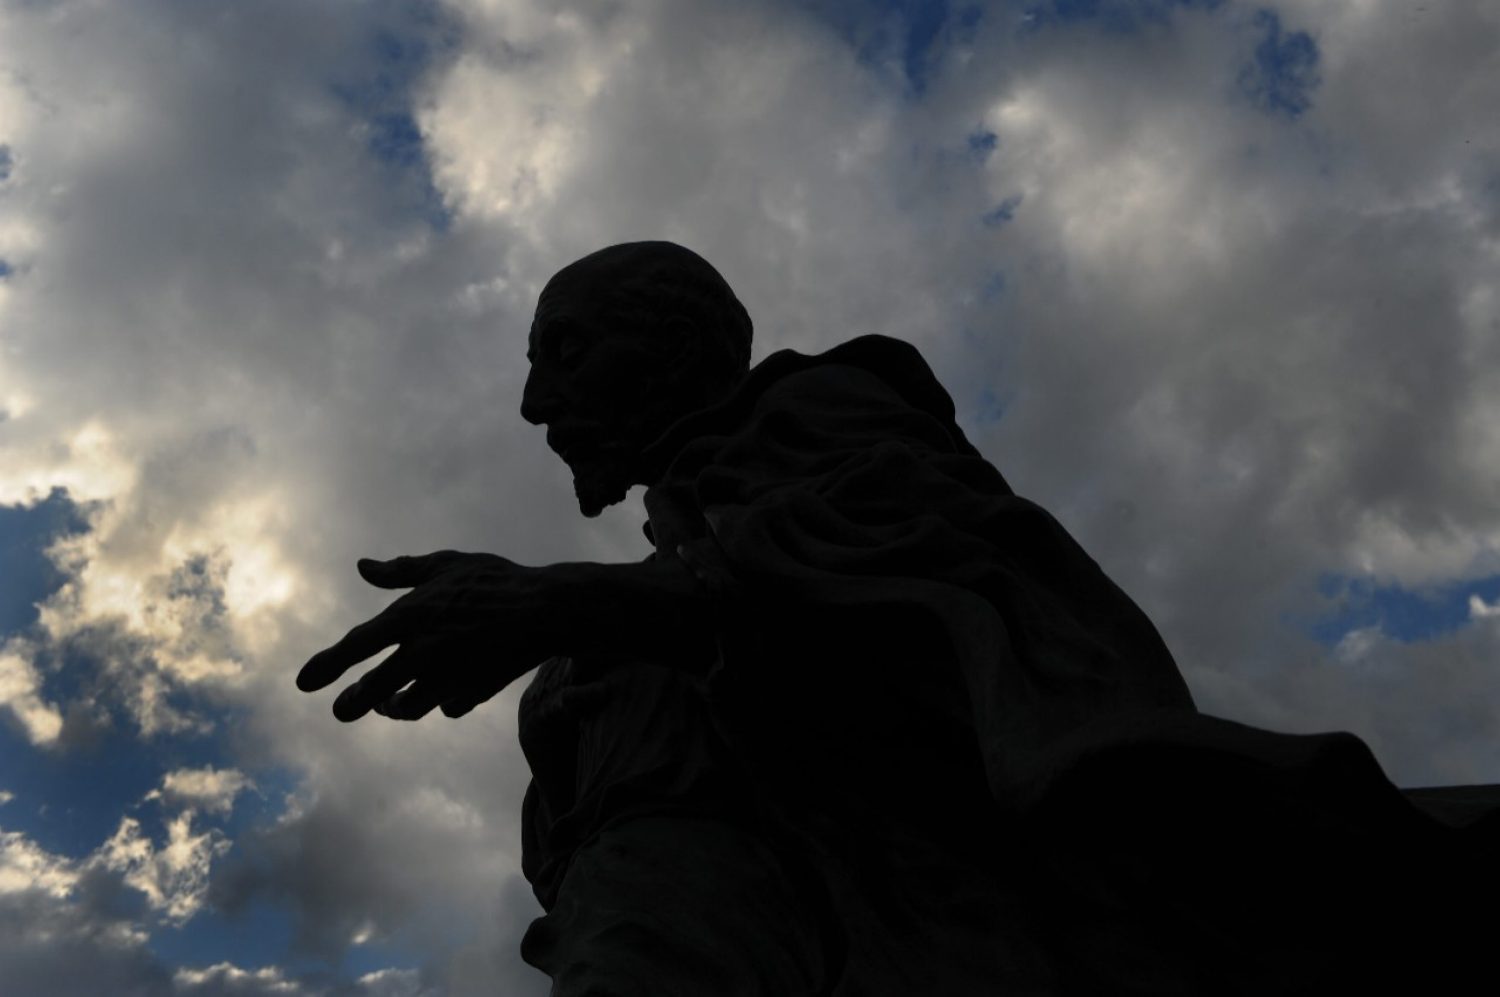 silhouette of the St. Ignatius statue with clouds in the background